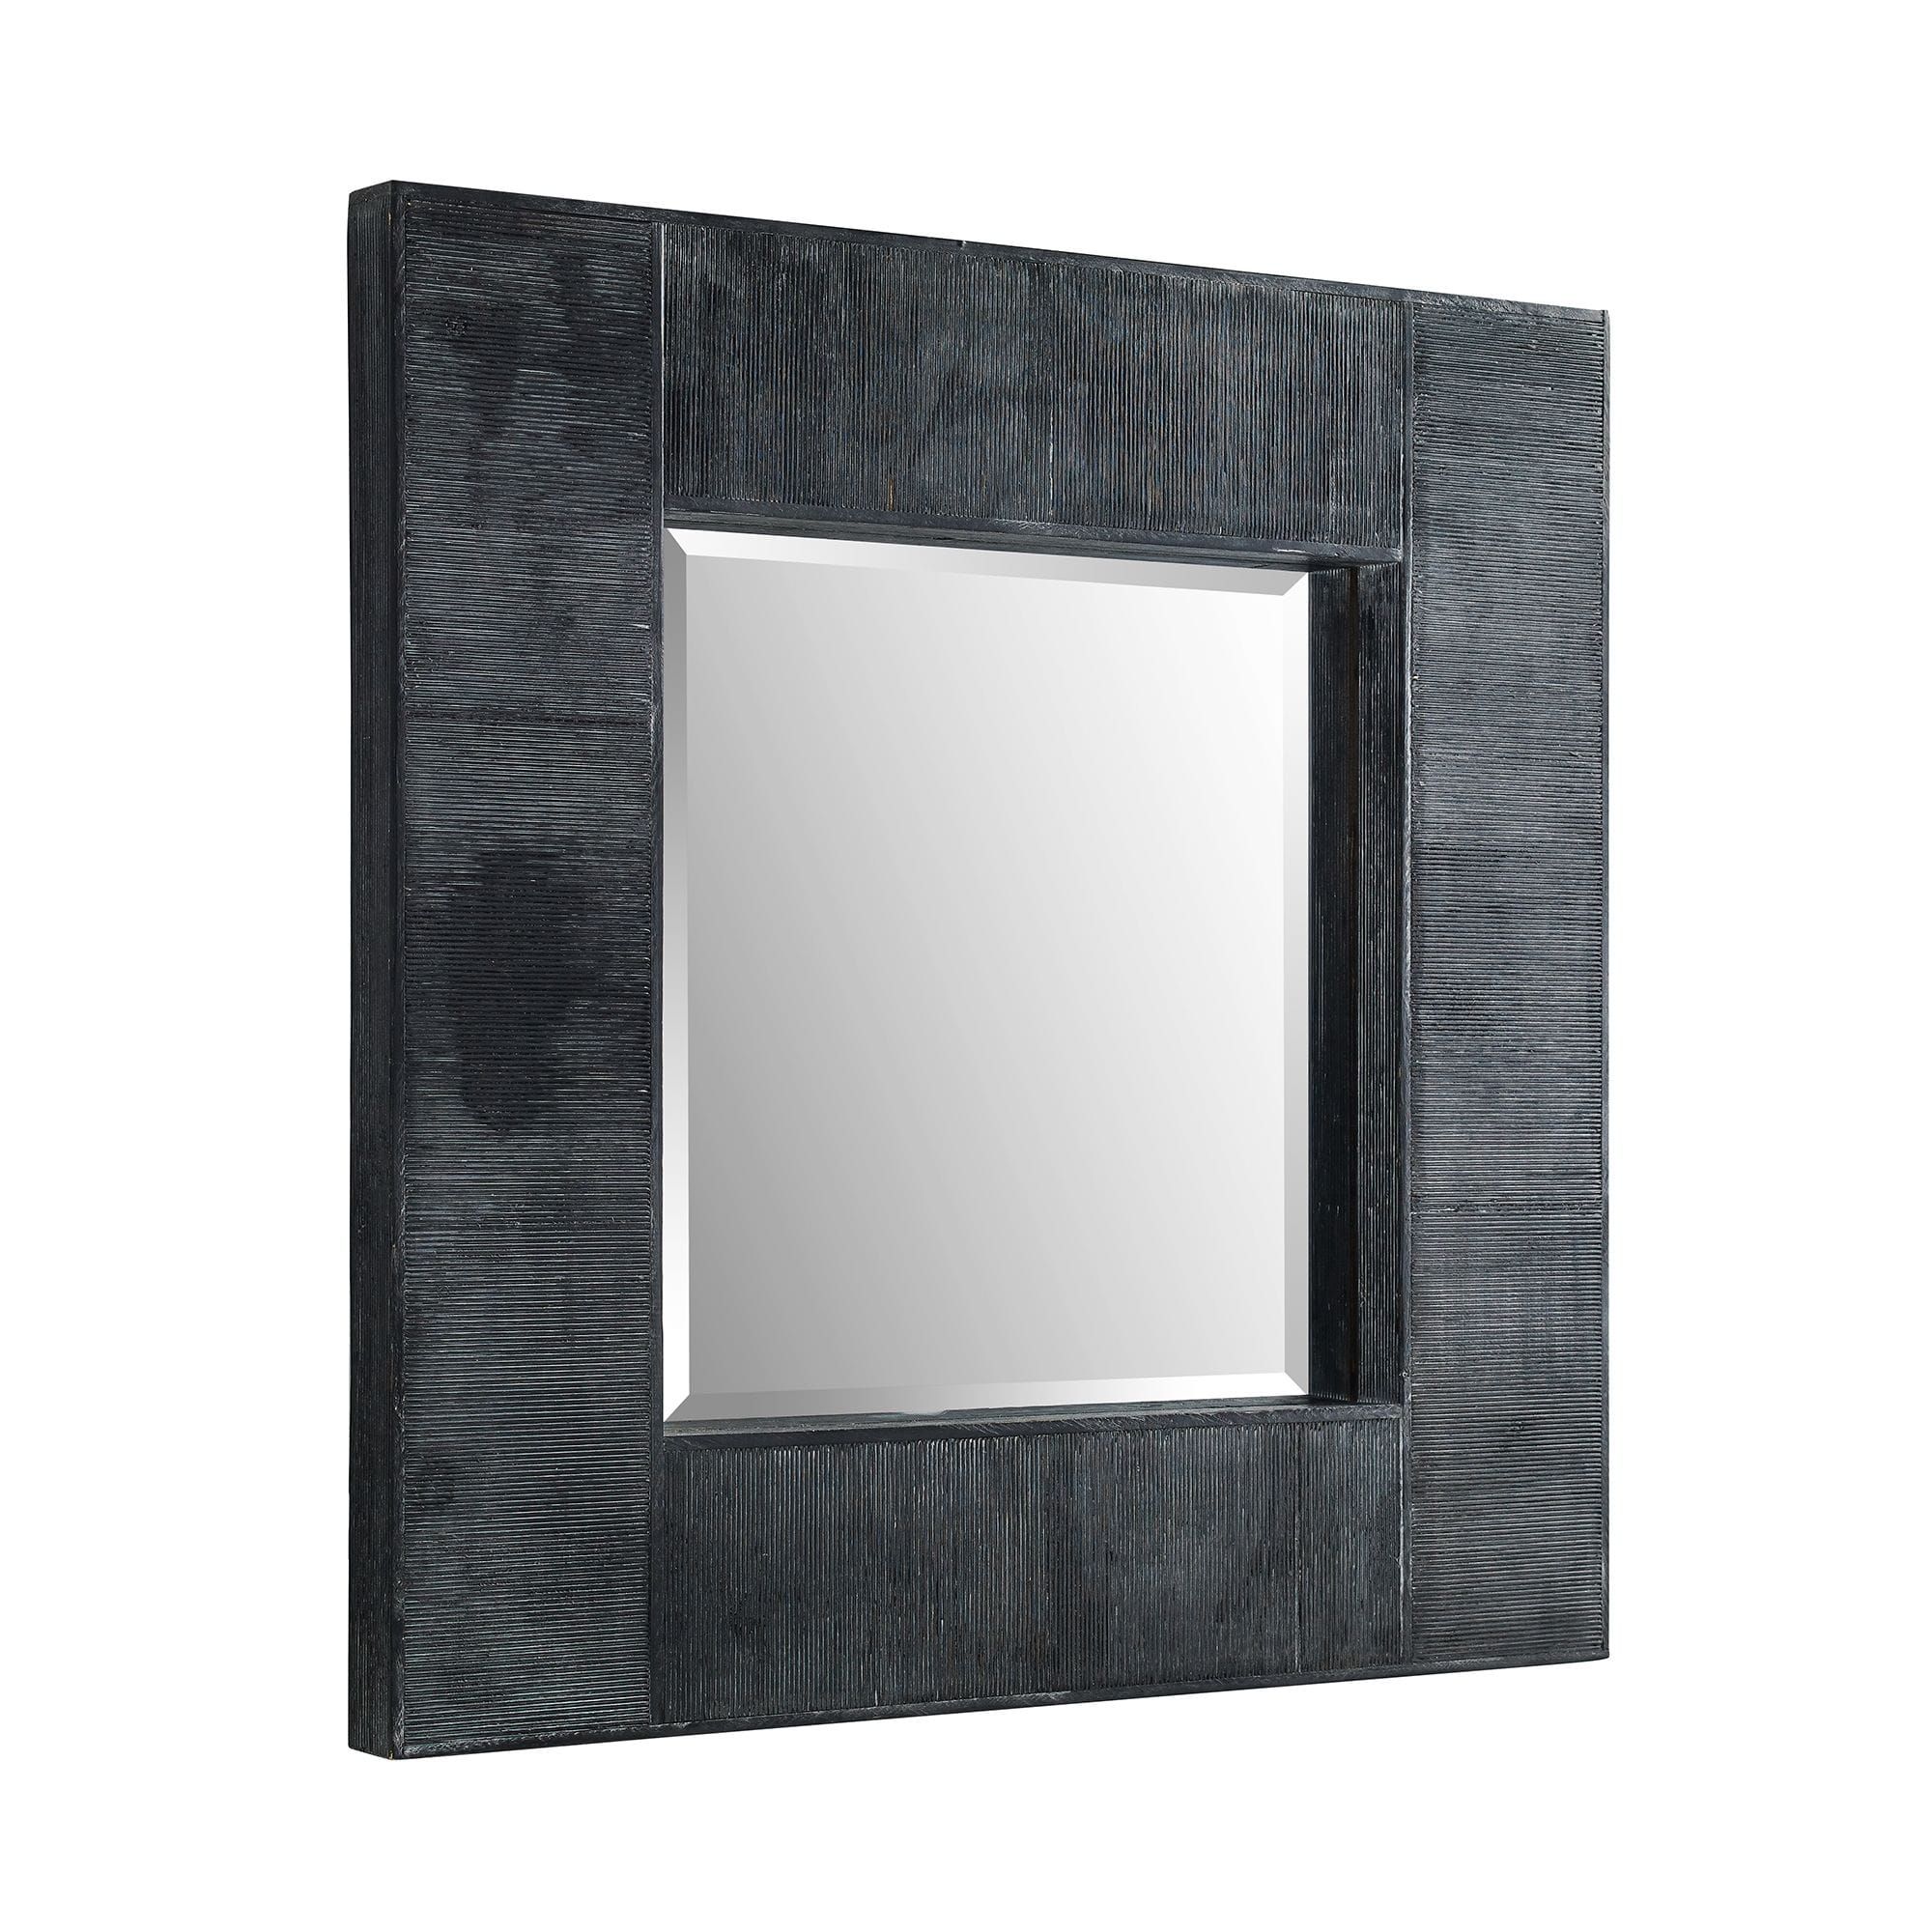 32 Inch Modern Industrial Square Wall Mirrorwalker Edison Throughout Black Square Wall Mirrors (View 11 of 15)